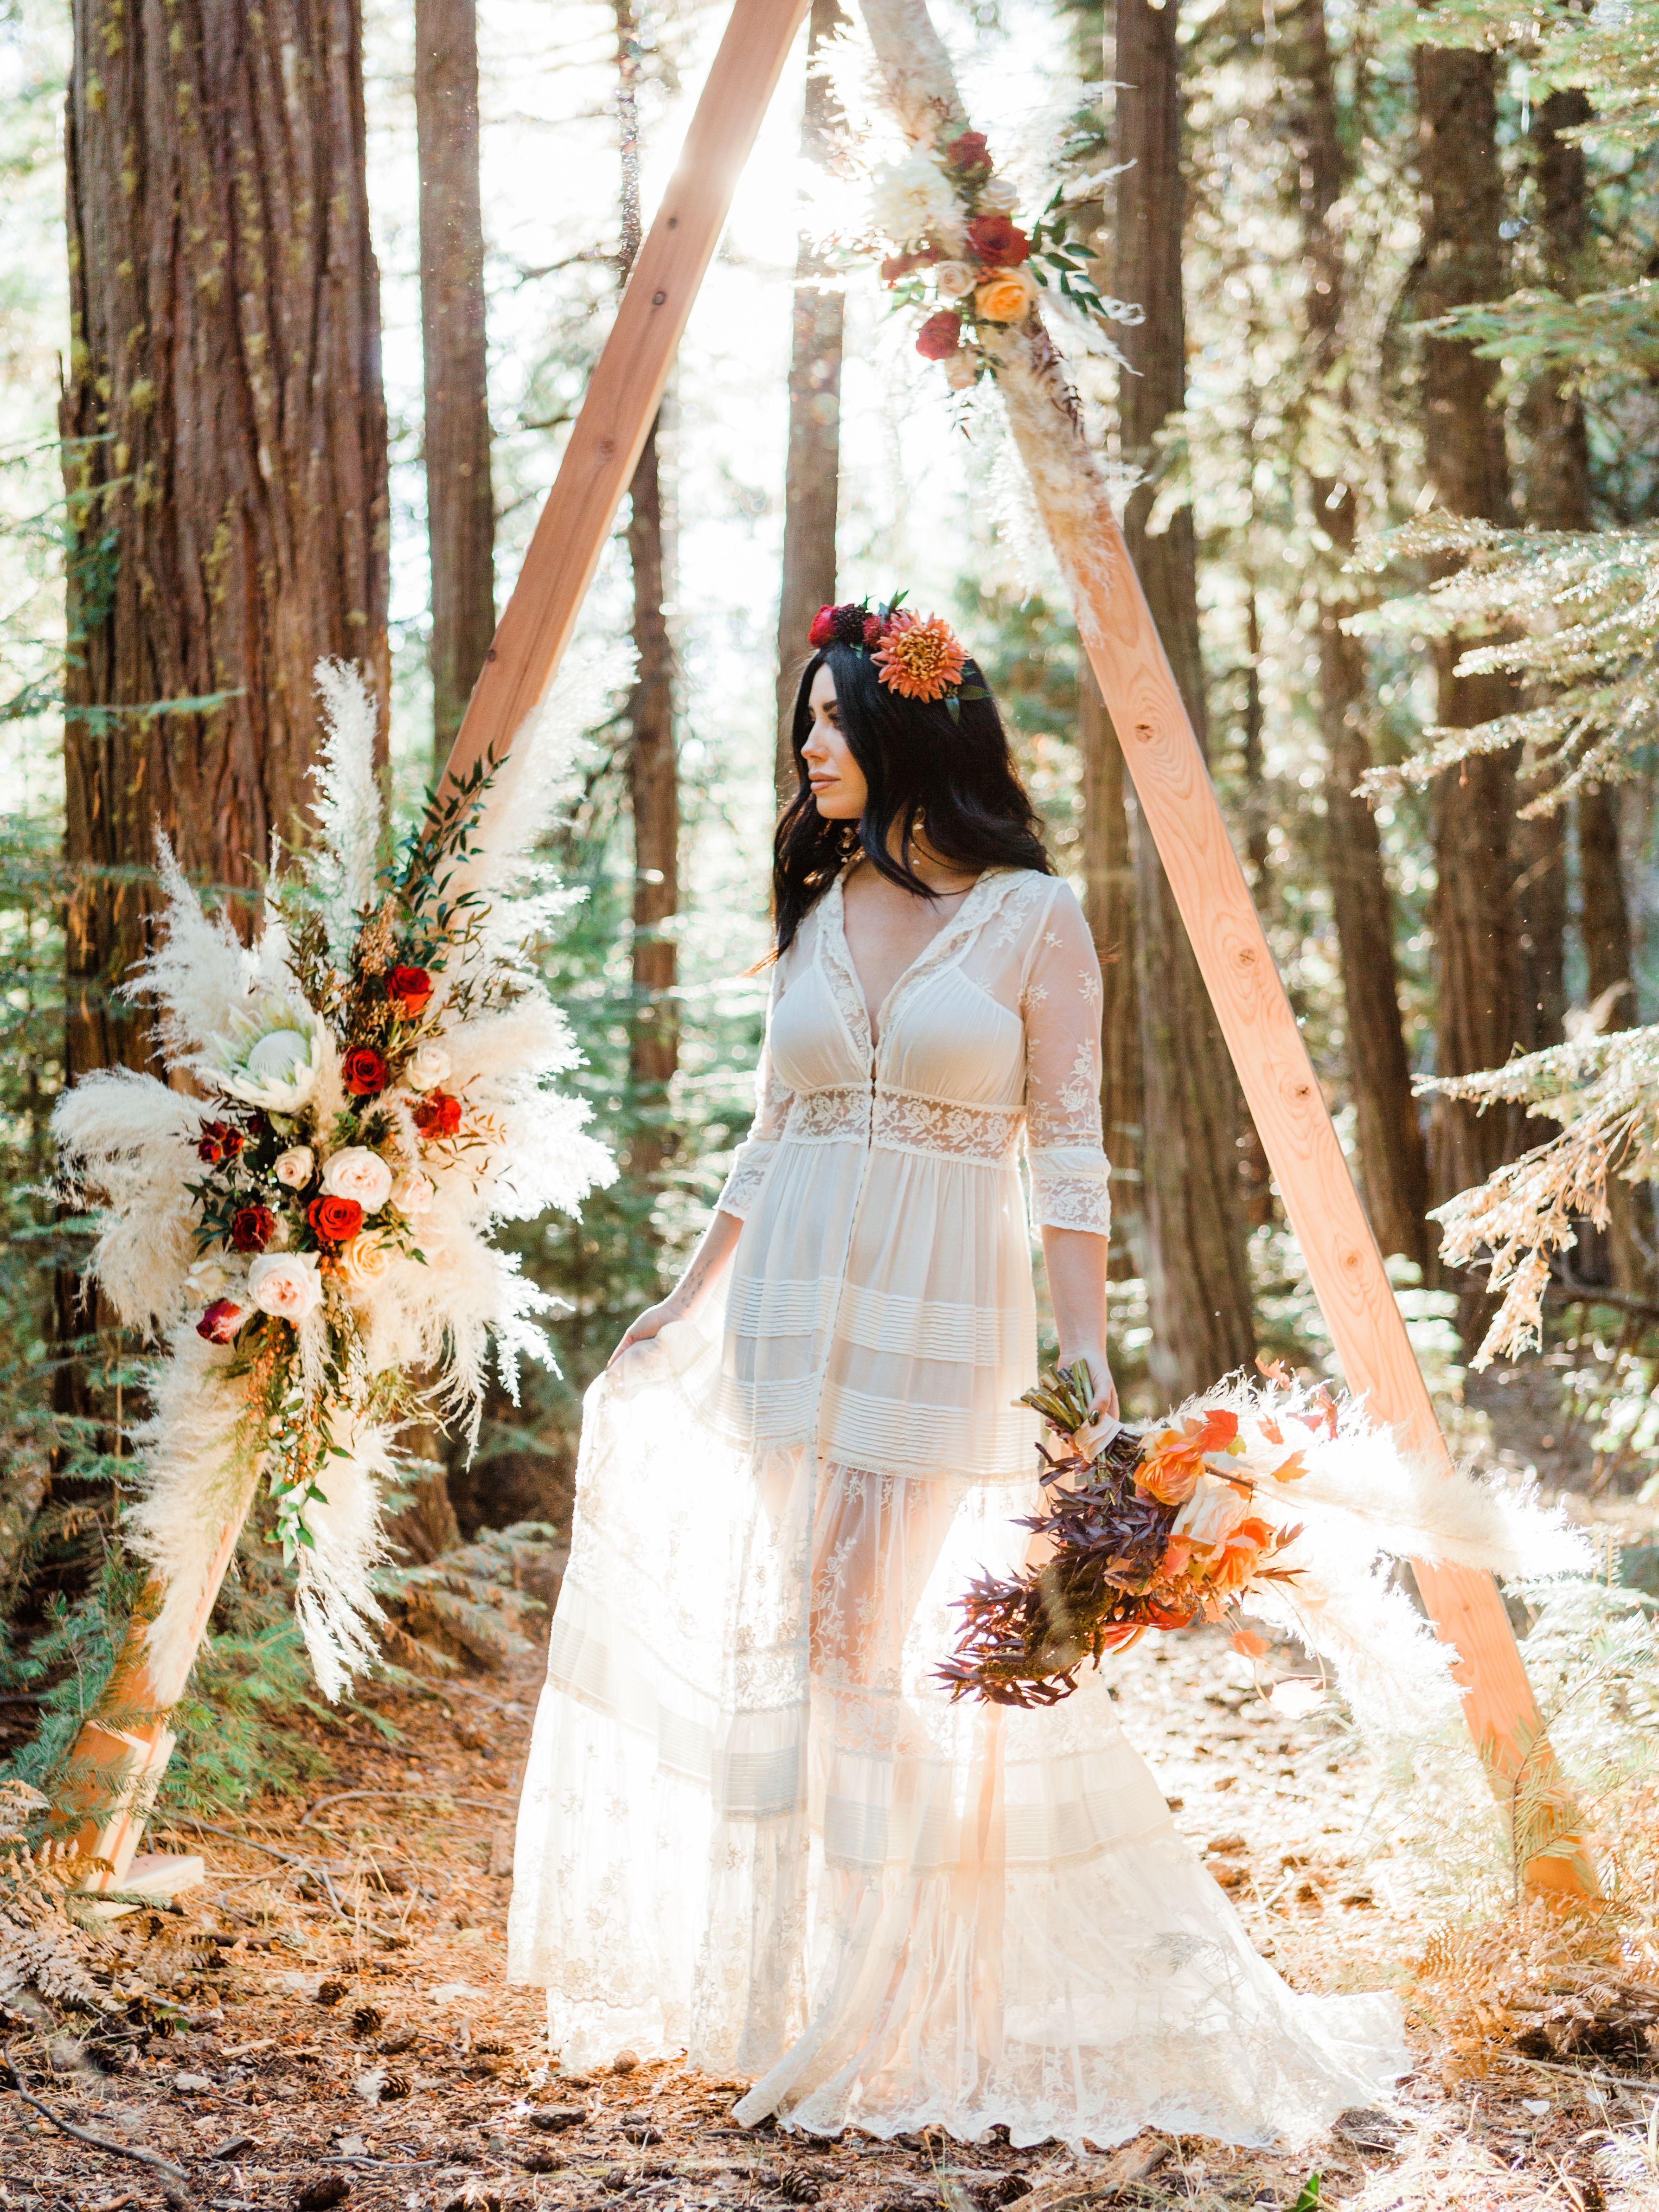 Forest Bohemian Wedding Inspiration - Forest Bohemian Wedding Inspiration -   19 beauty Shoot wedding ideas